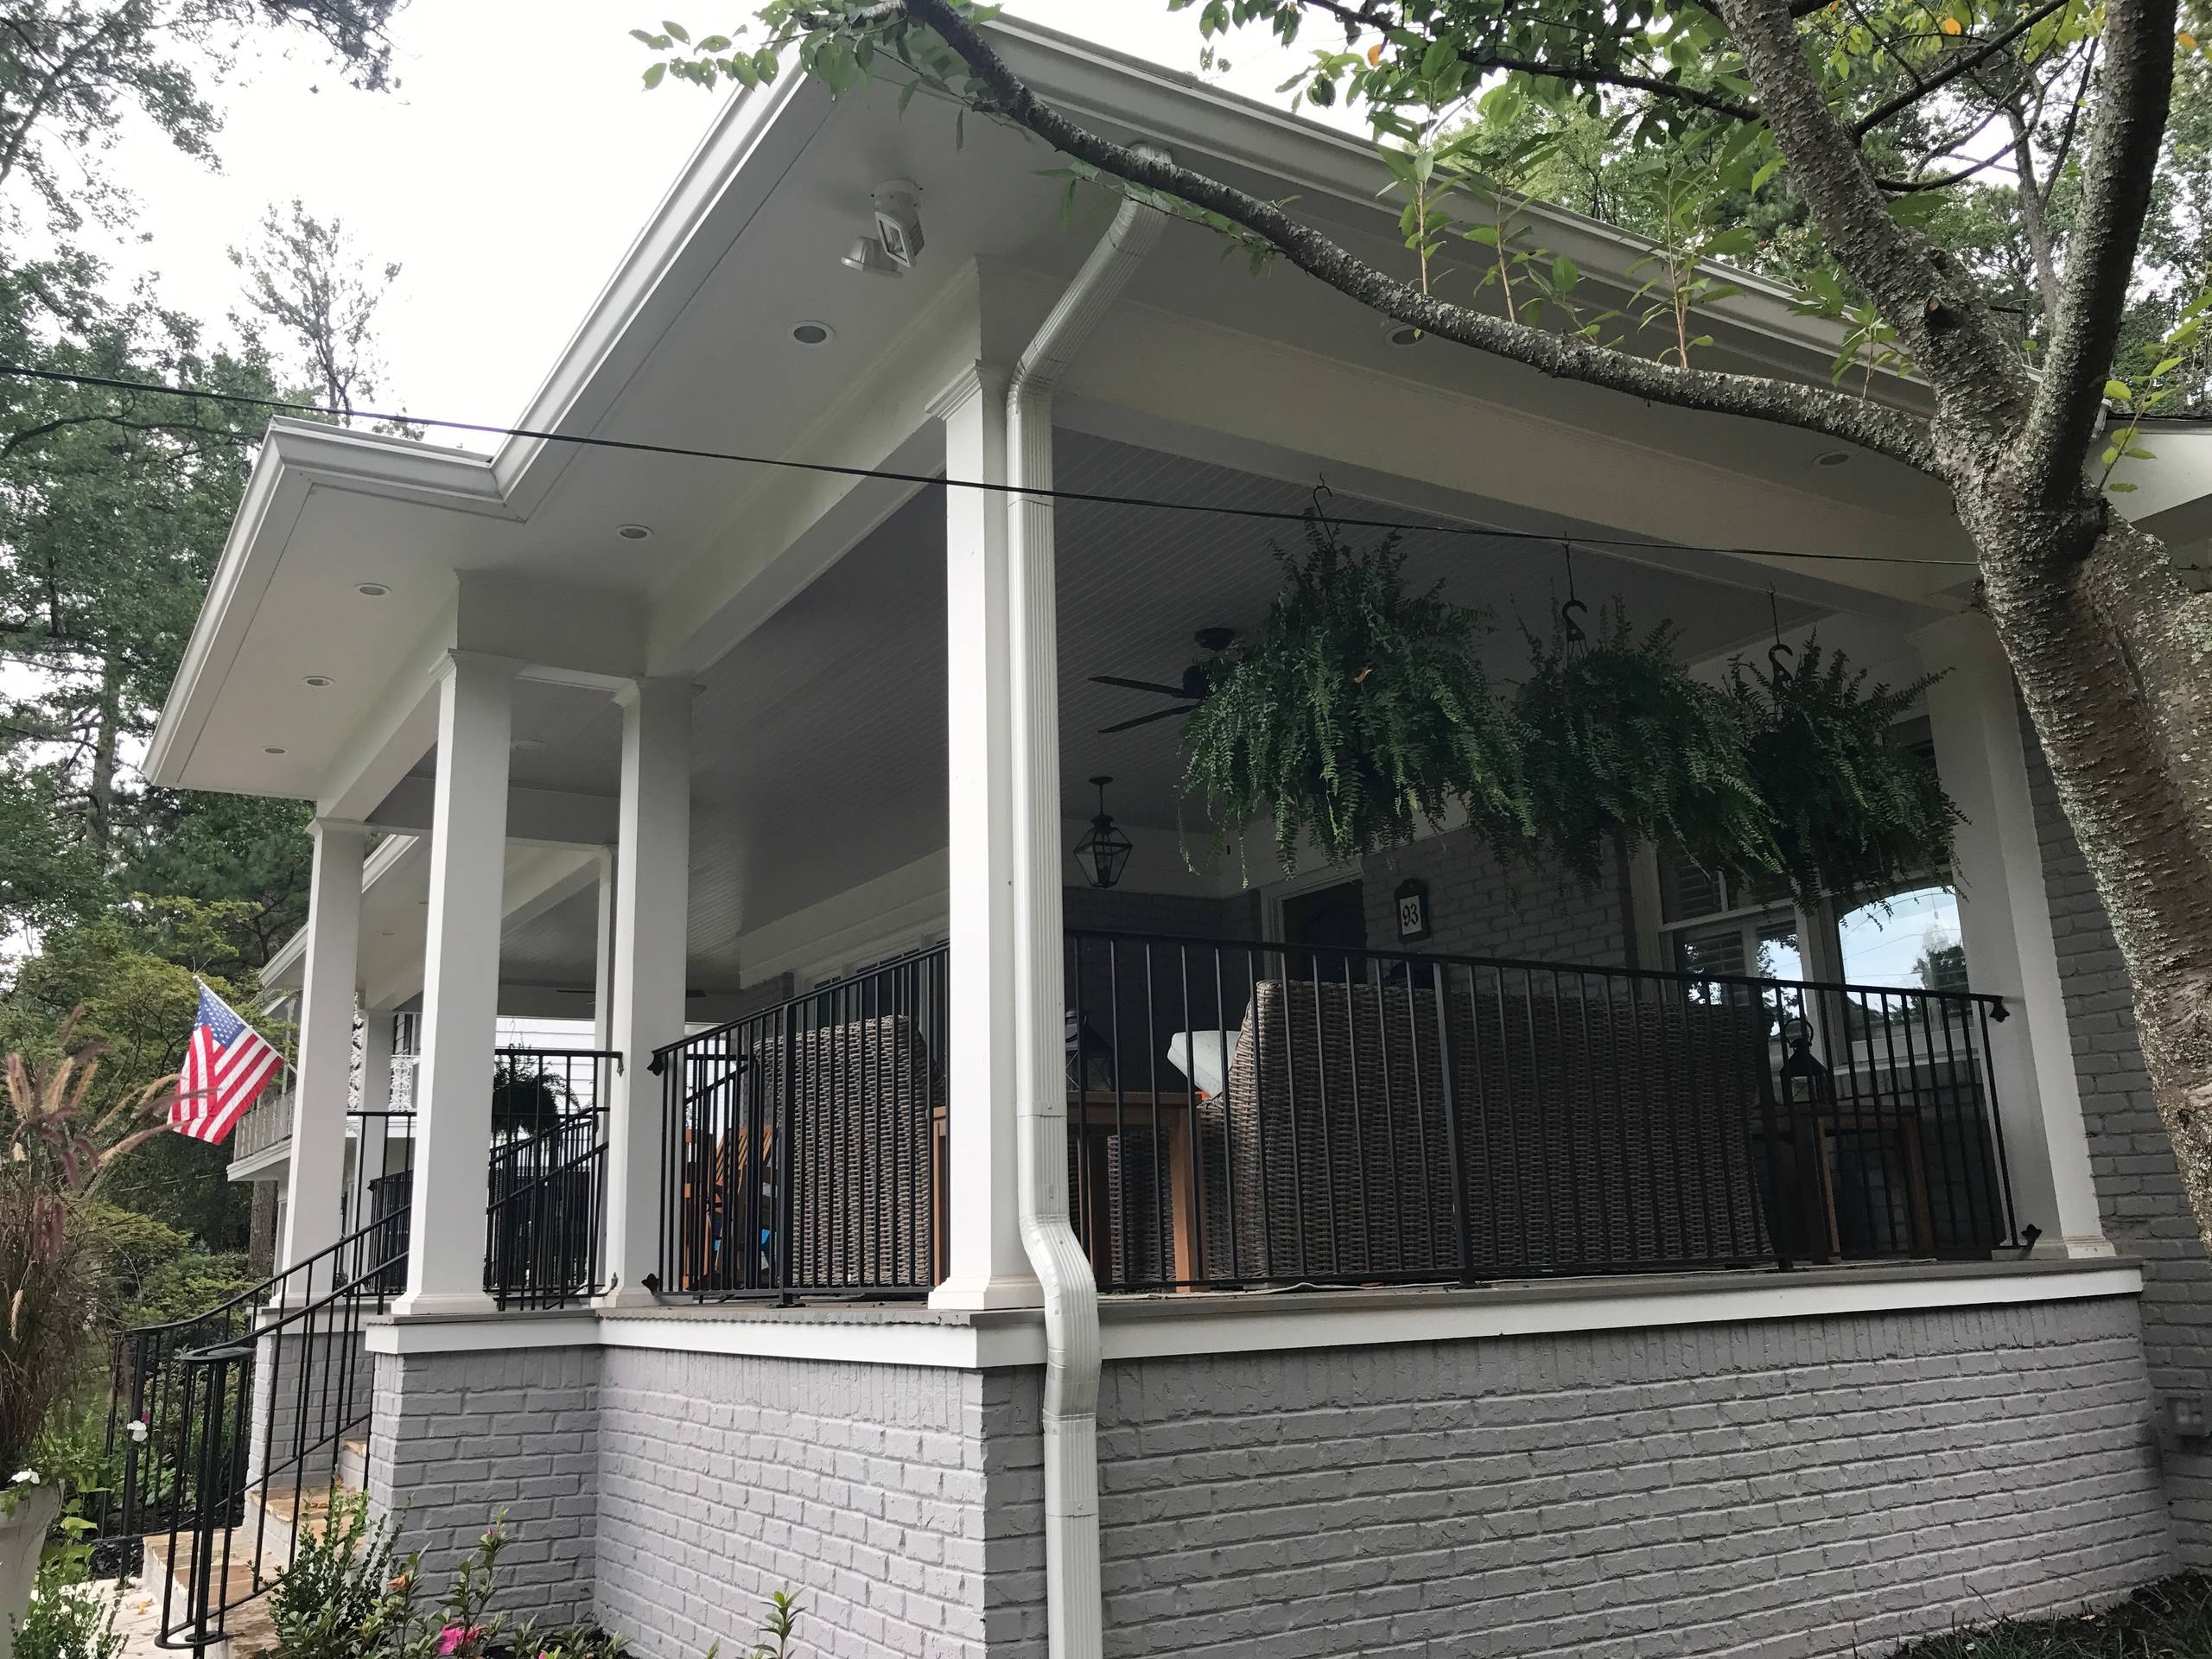 New Covered Front Porch & Roof - Painted House, Window Sashes